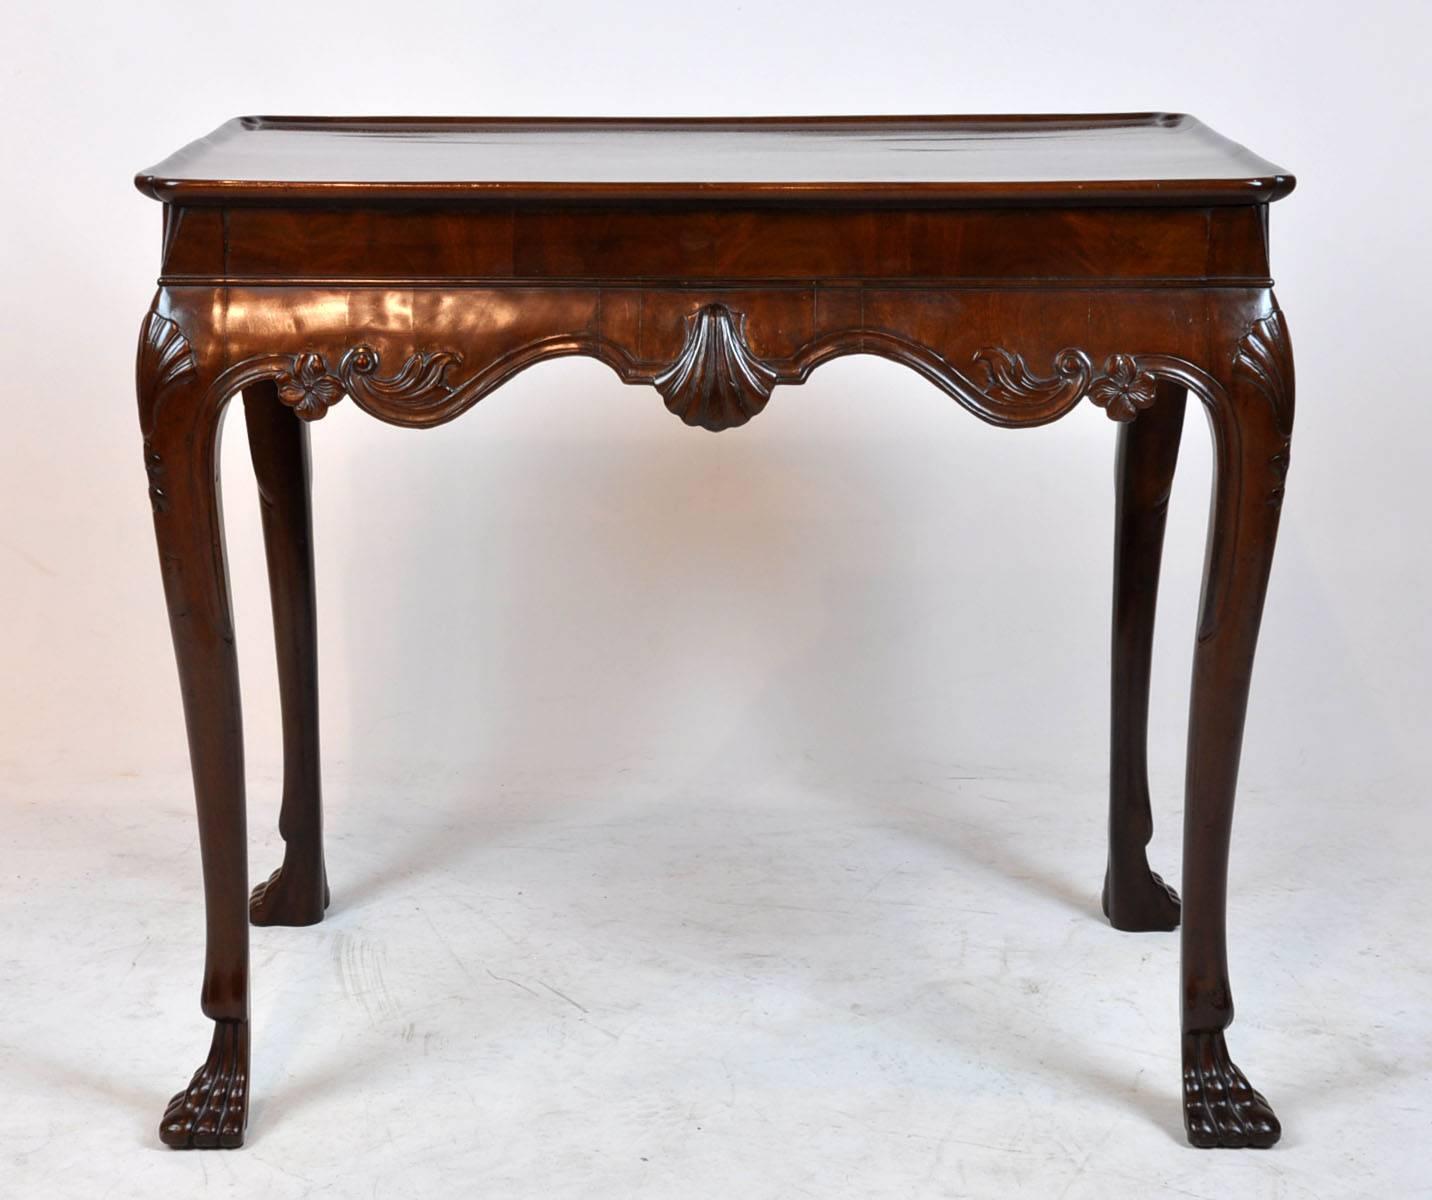 Single board top. English or most likely Irish, late 18th century. Six shell carved Chippendale tea table.